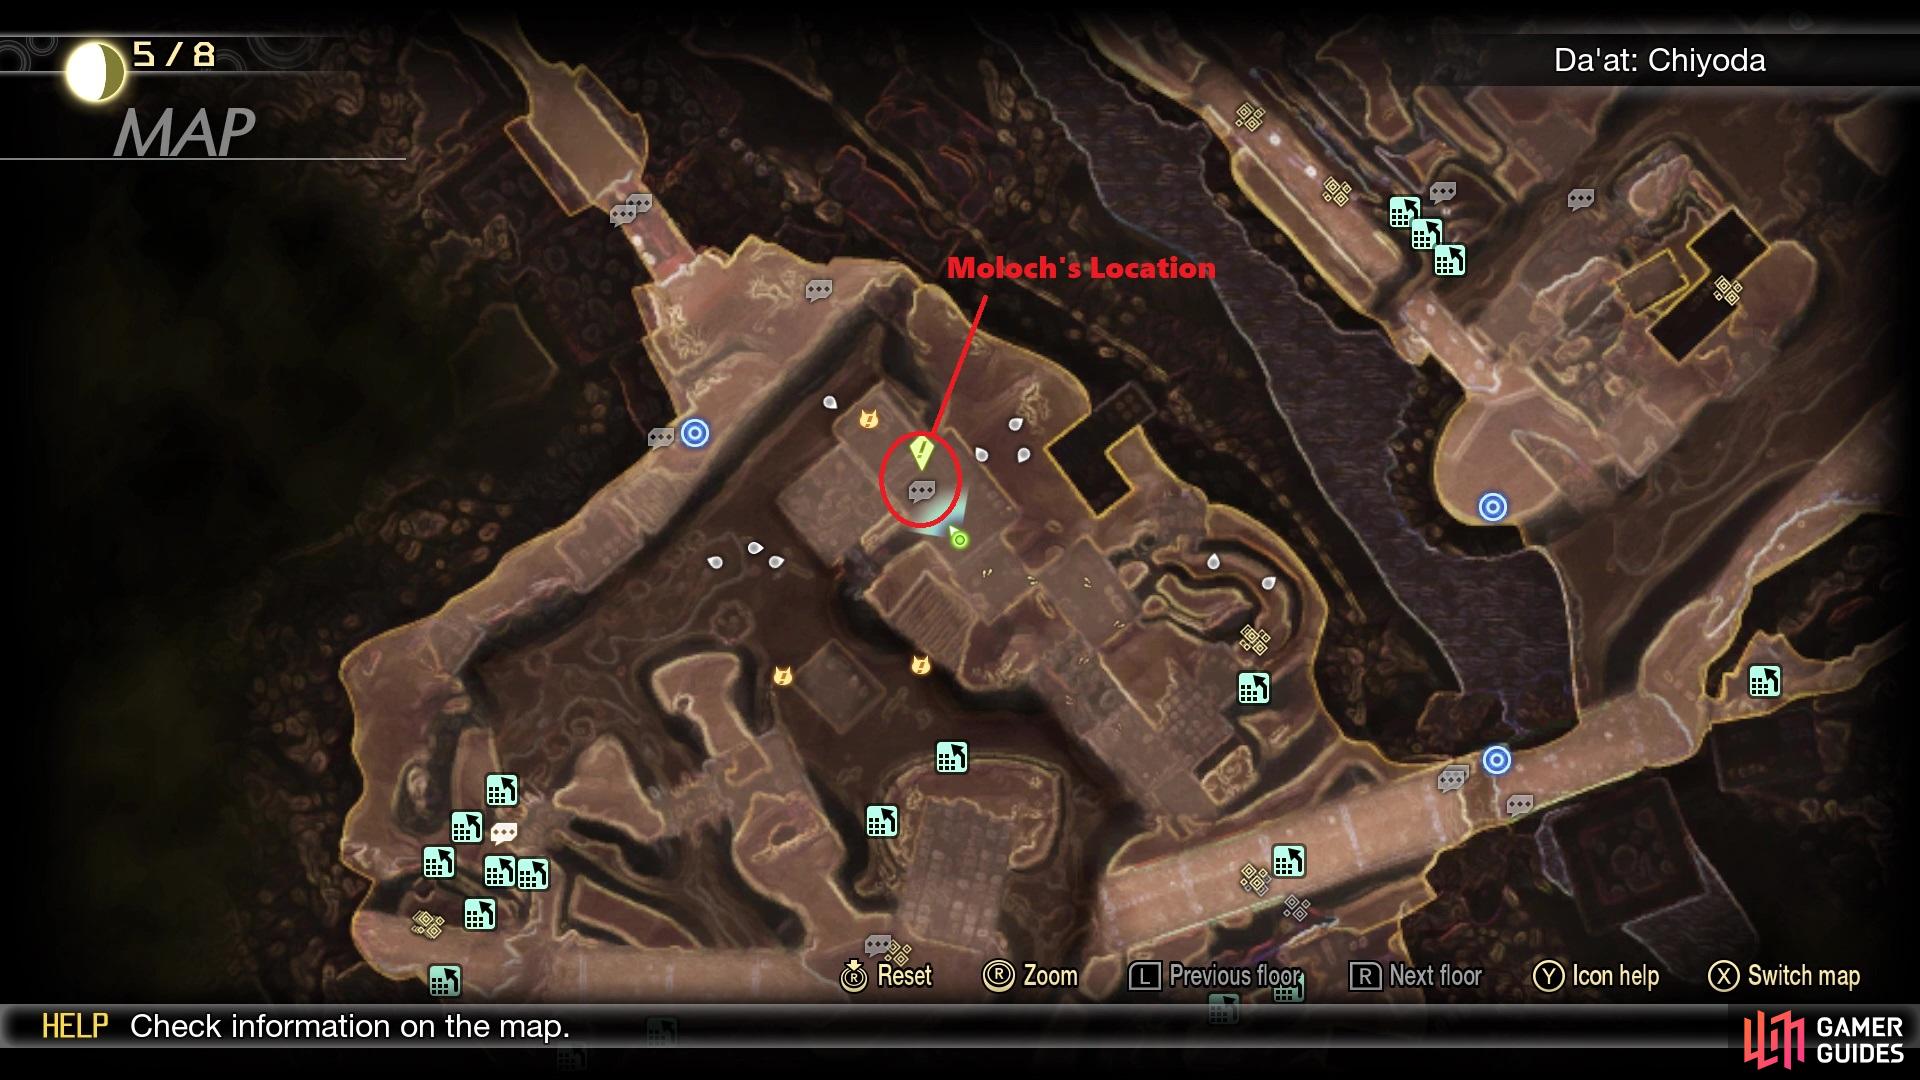 Moloch’s location on the map